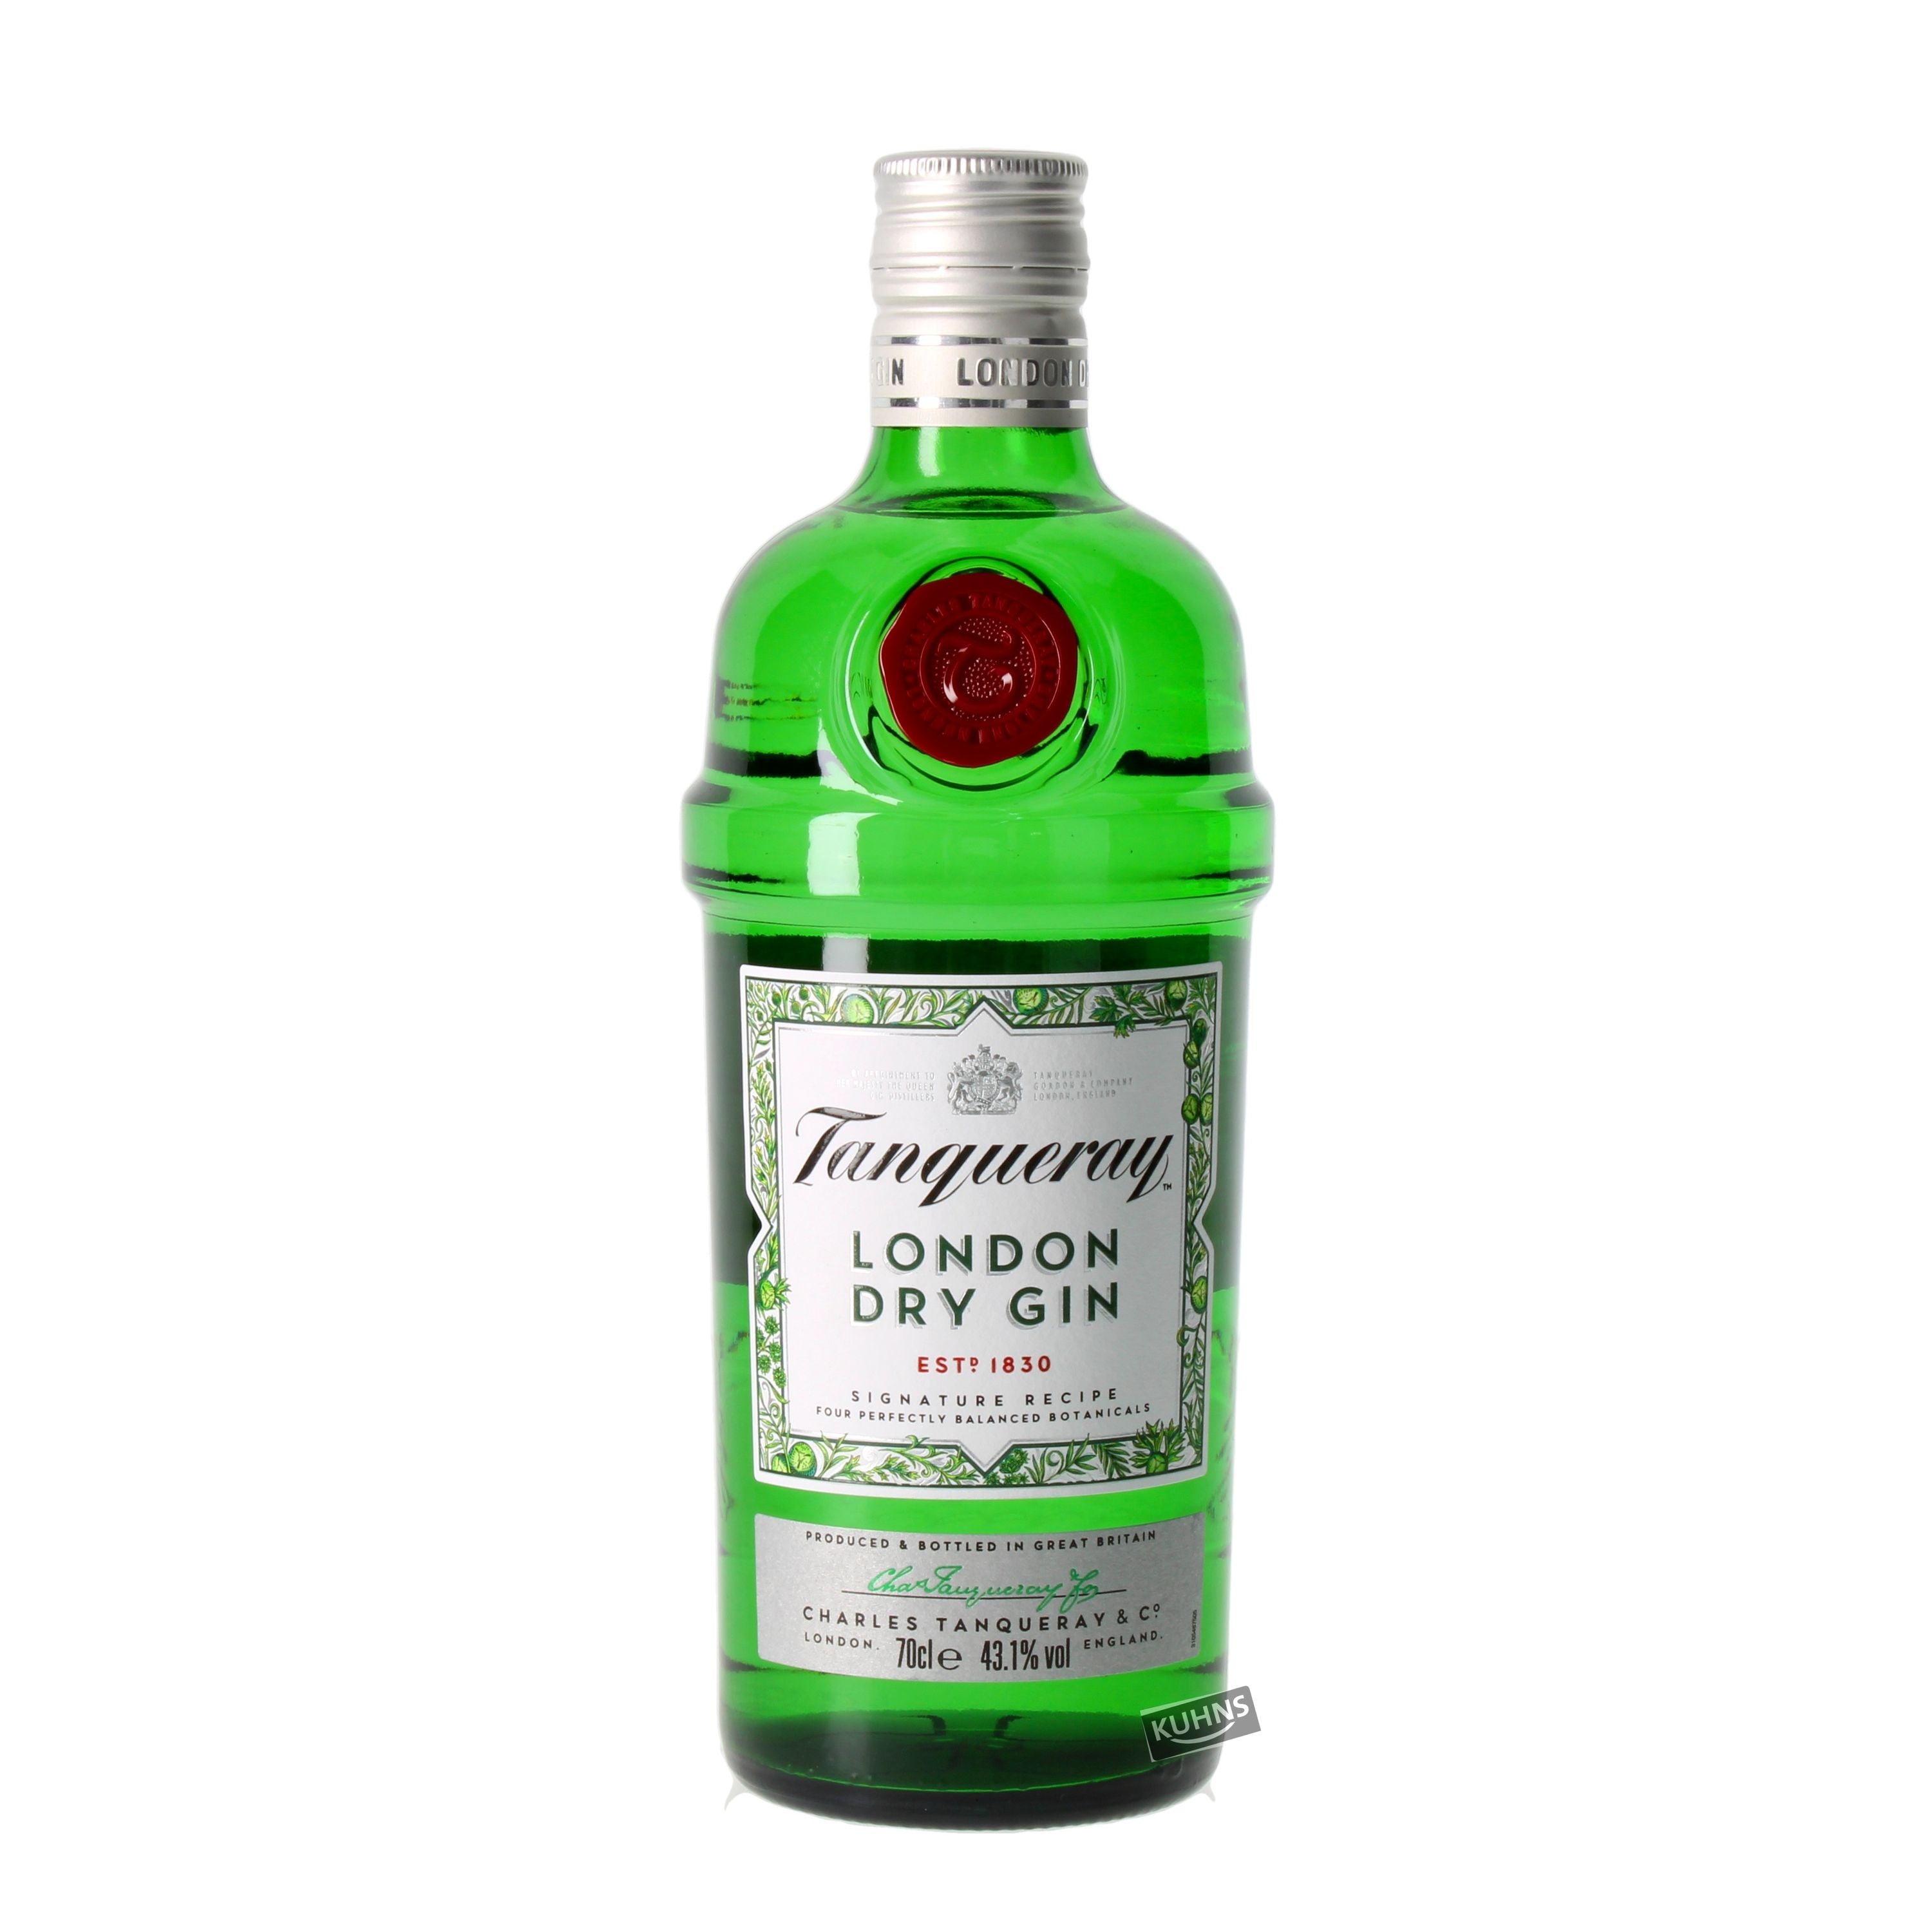 Tanqueray London Dry Gin 0.7l, alc. 43.1% ABV, Gin England